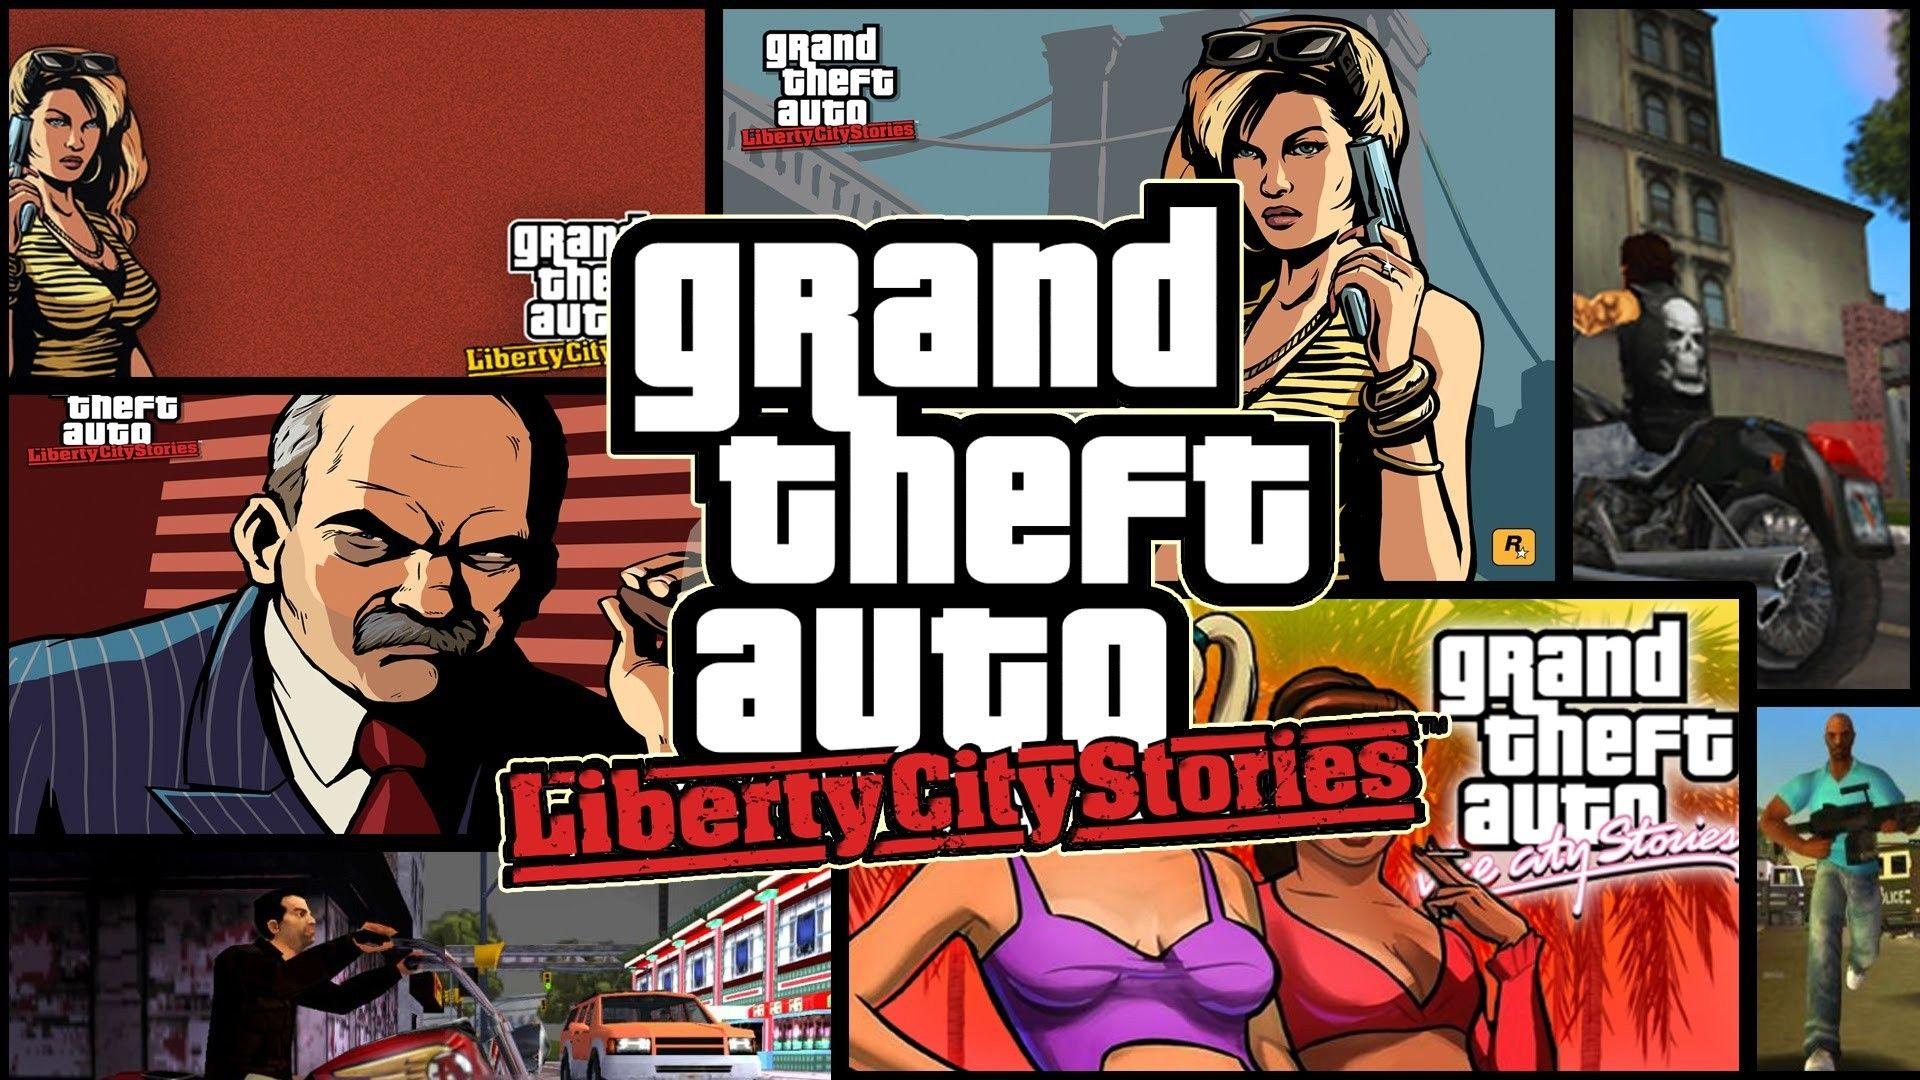 Grand Theft Auto: Vice City Stories - PSP Gameplay 1080p (PPSSPP